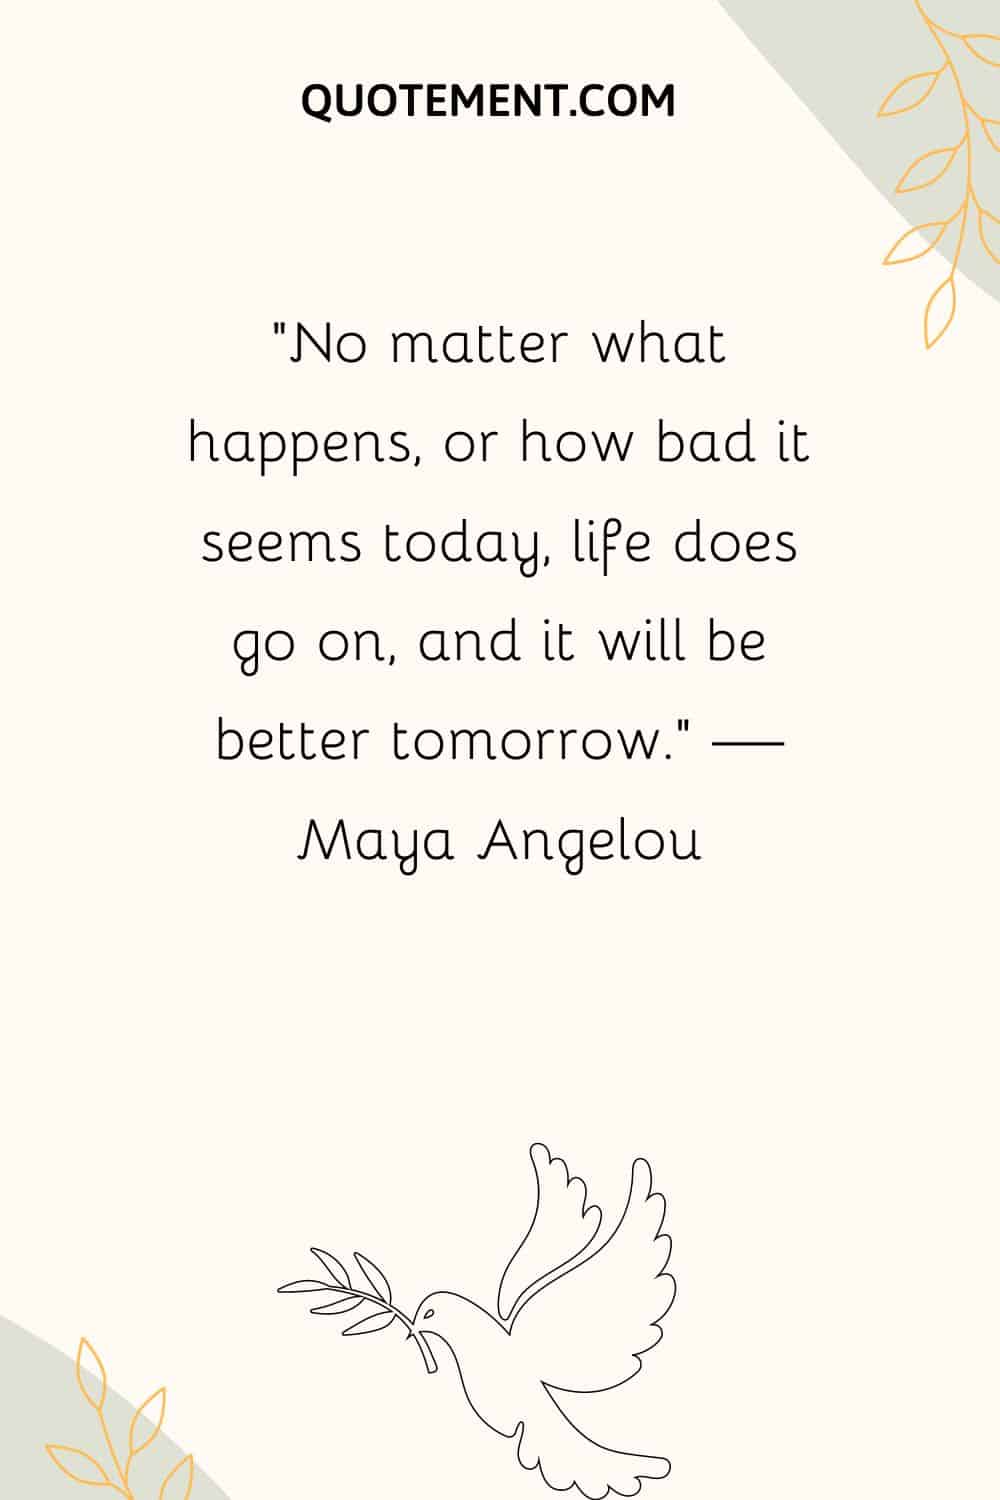 “No matter what happens, or how bad it seems today, life does go on, and it will be better tomorrow.” — Maya Angelou